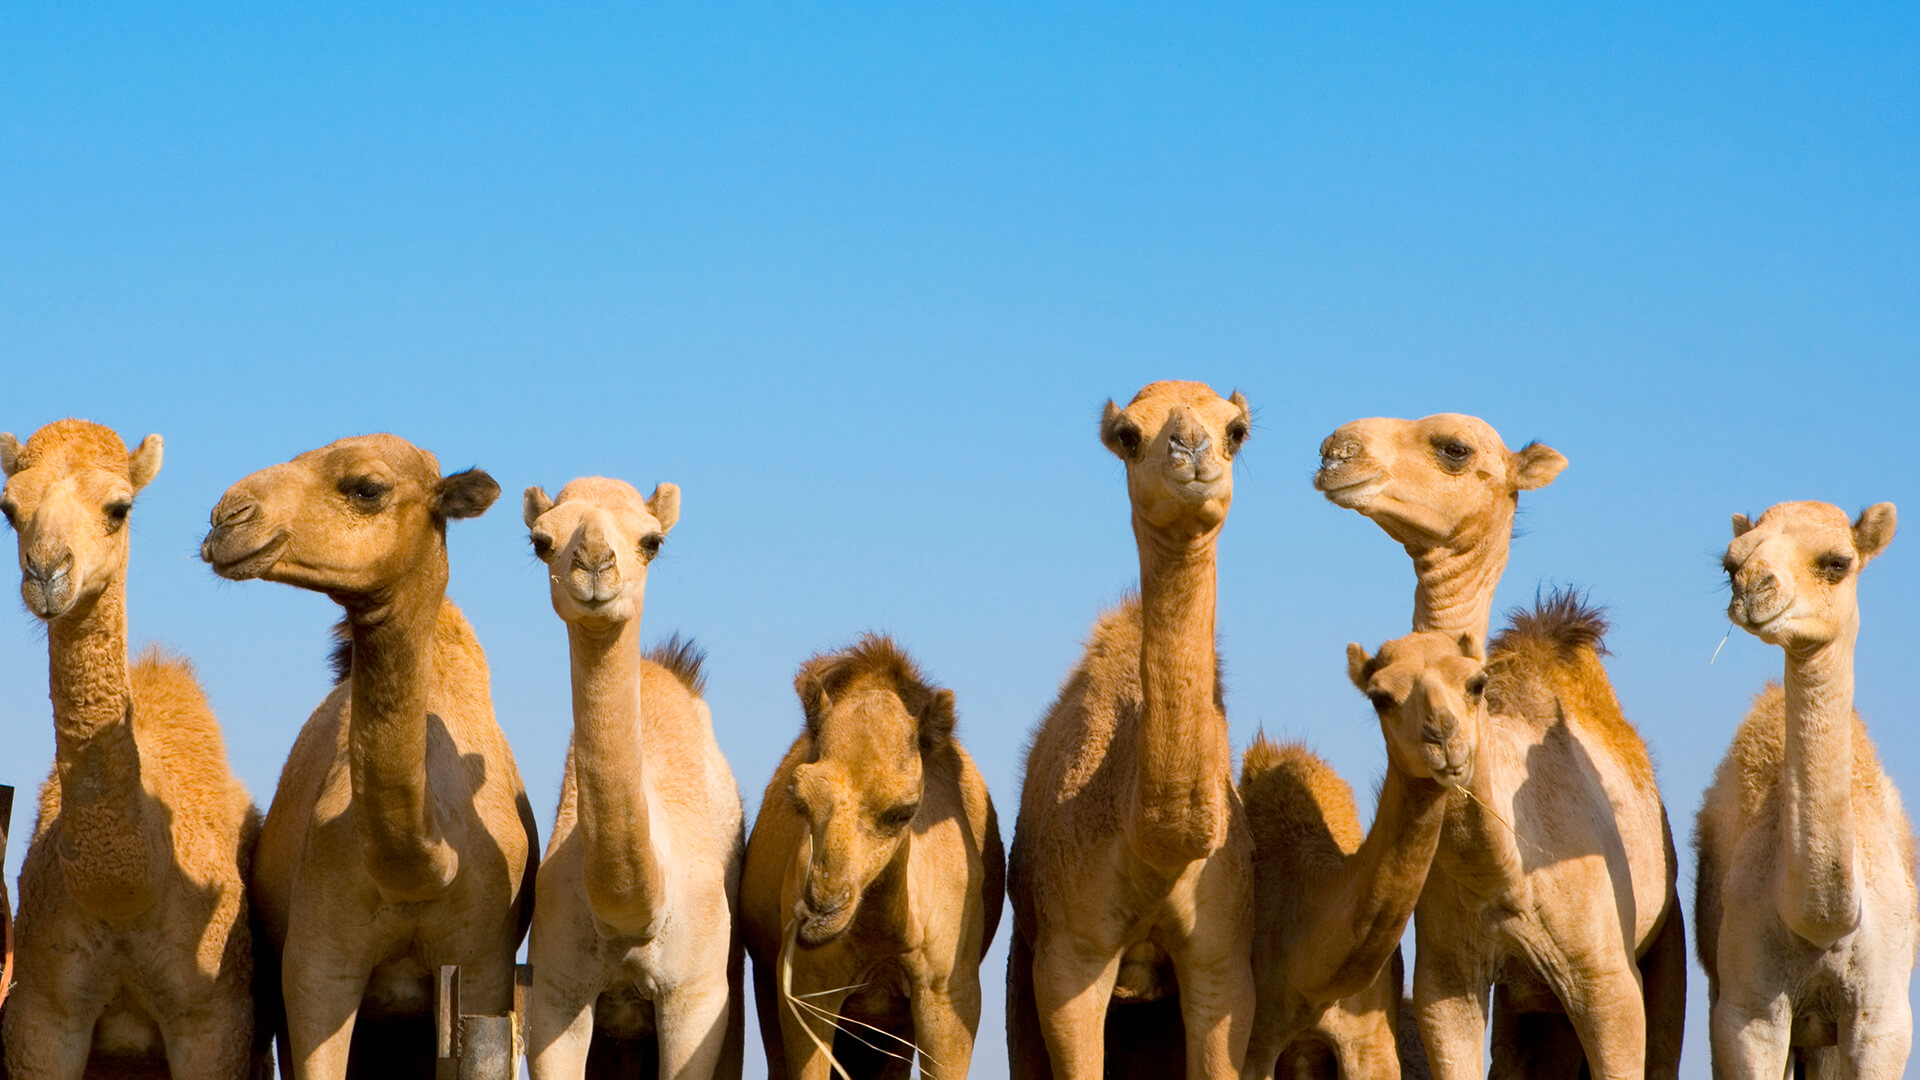 Eight young bactrian camels lined up in a row facing the viewer